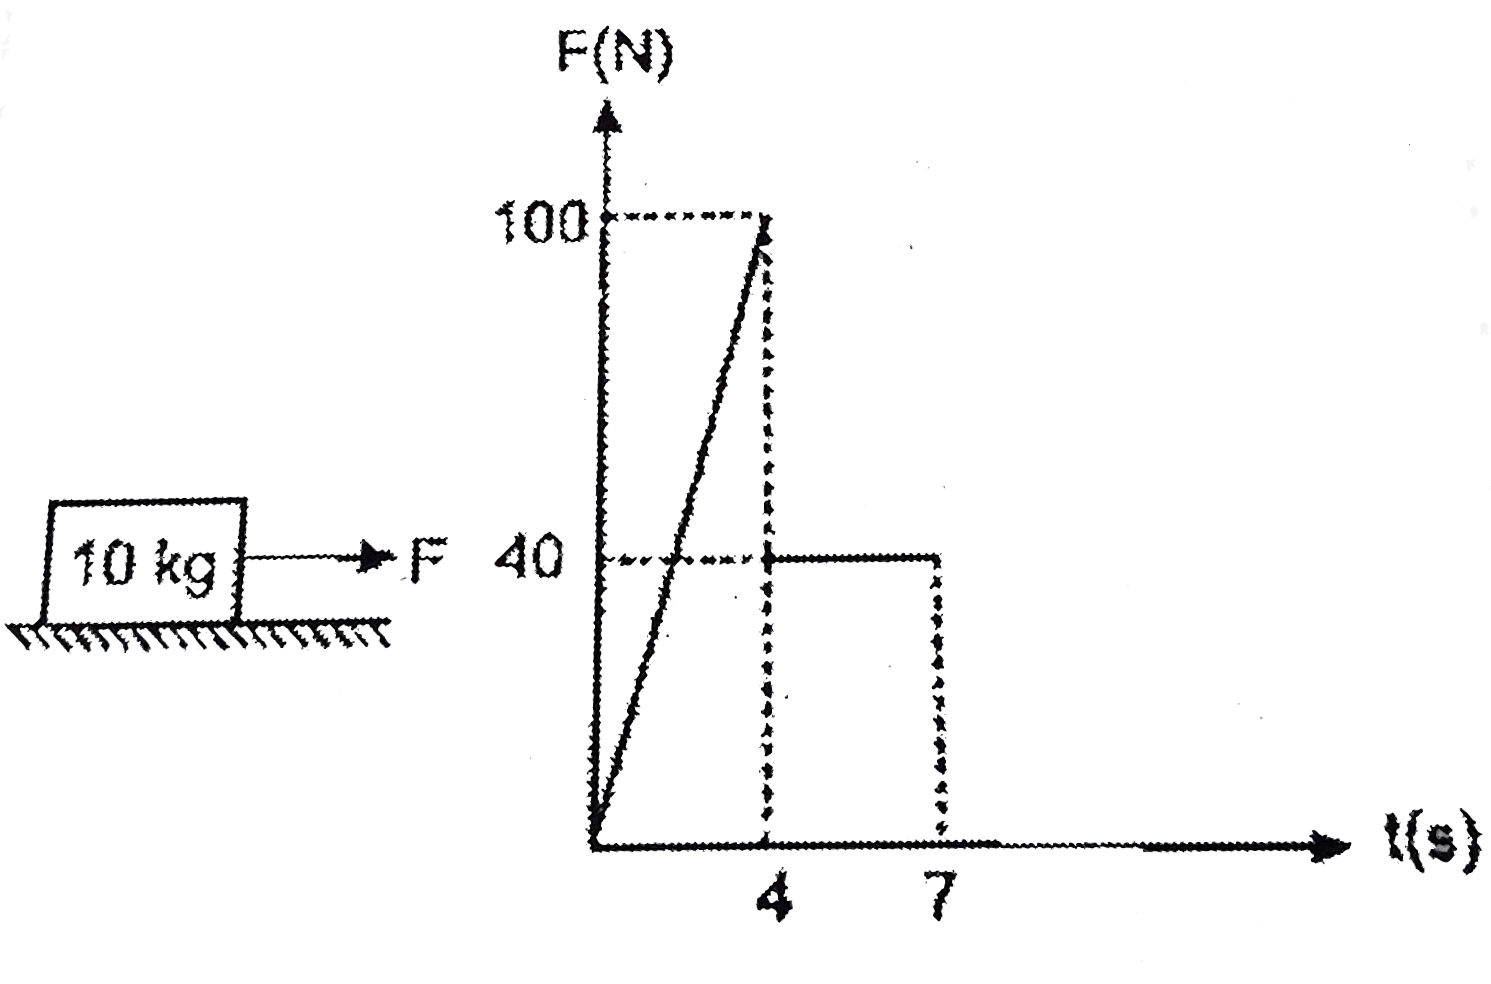 The 10 kg block is resting on the horizontal surface when the force 'F is applied to it for 7 second. The variation of 'F with time is shown. Calculate the maximum velocity reached by the block and the total time 't' during which the block is in motion. The coefficient of static and kinetic friction are both, 0.50.